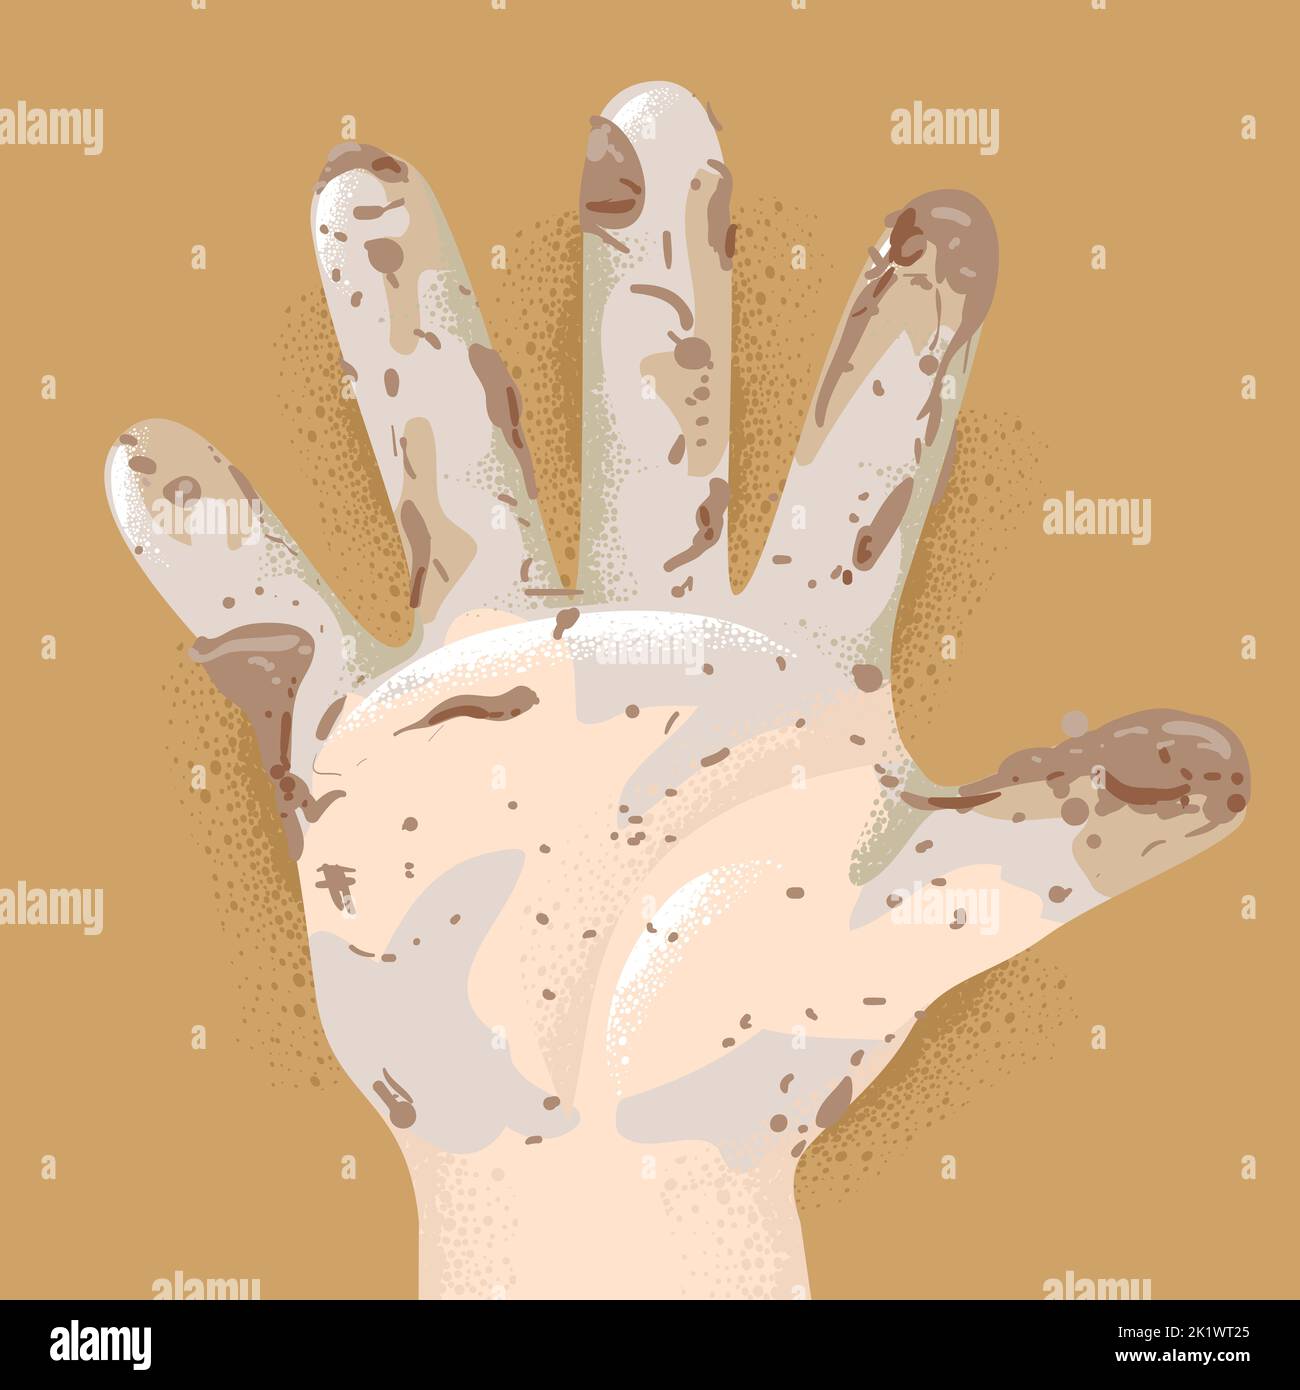 Illustration of a Dirty Hand of a Kid with Dry Mud from Playing Stock Photo